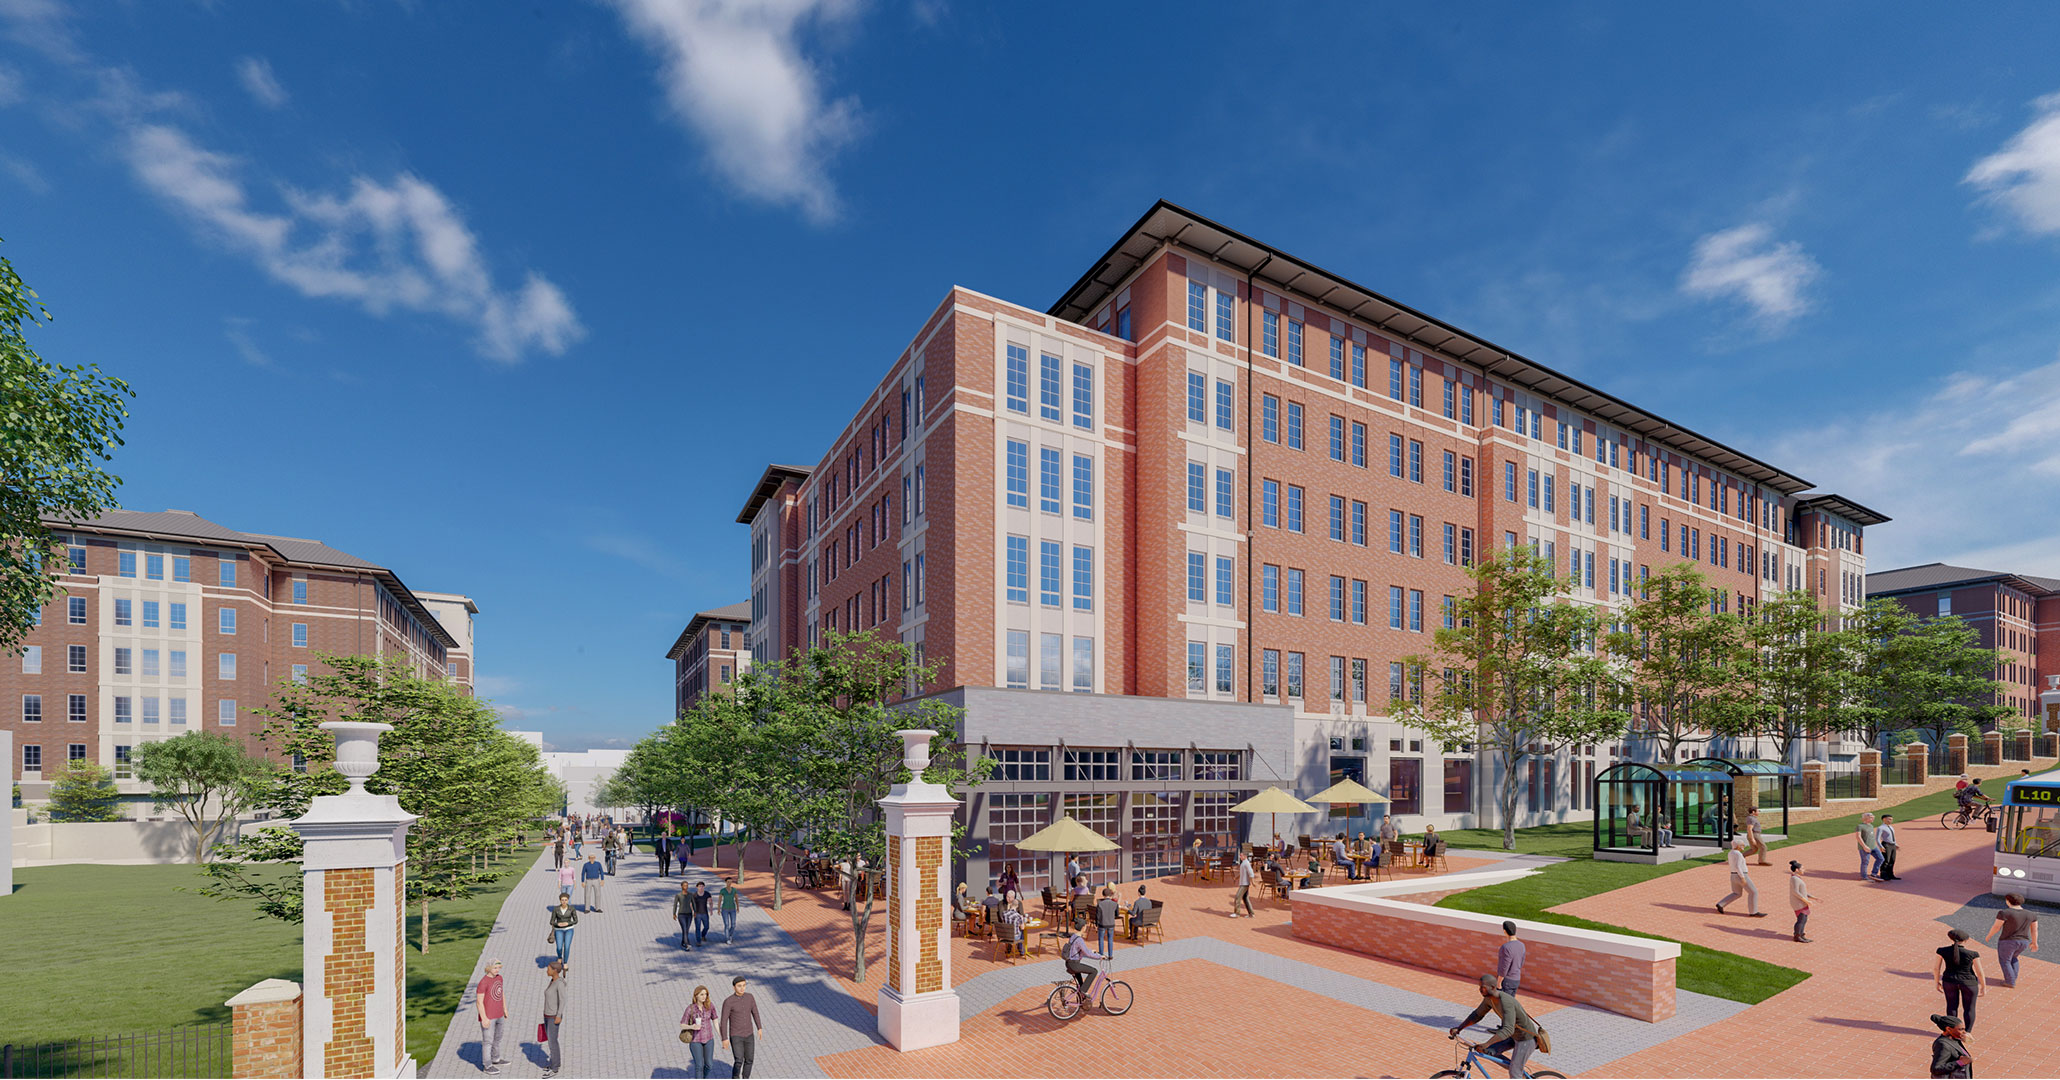 The University of South Carolina is working with Boudreaux architects to design a new development Campus Village.